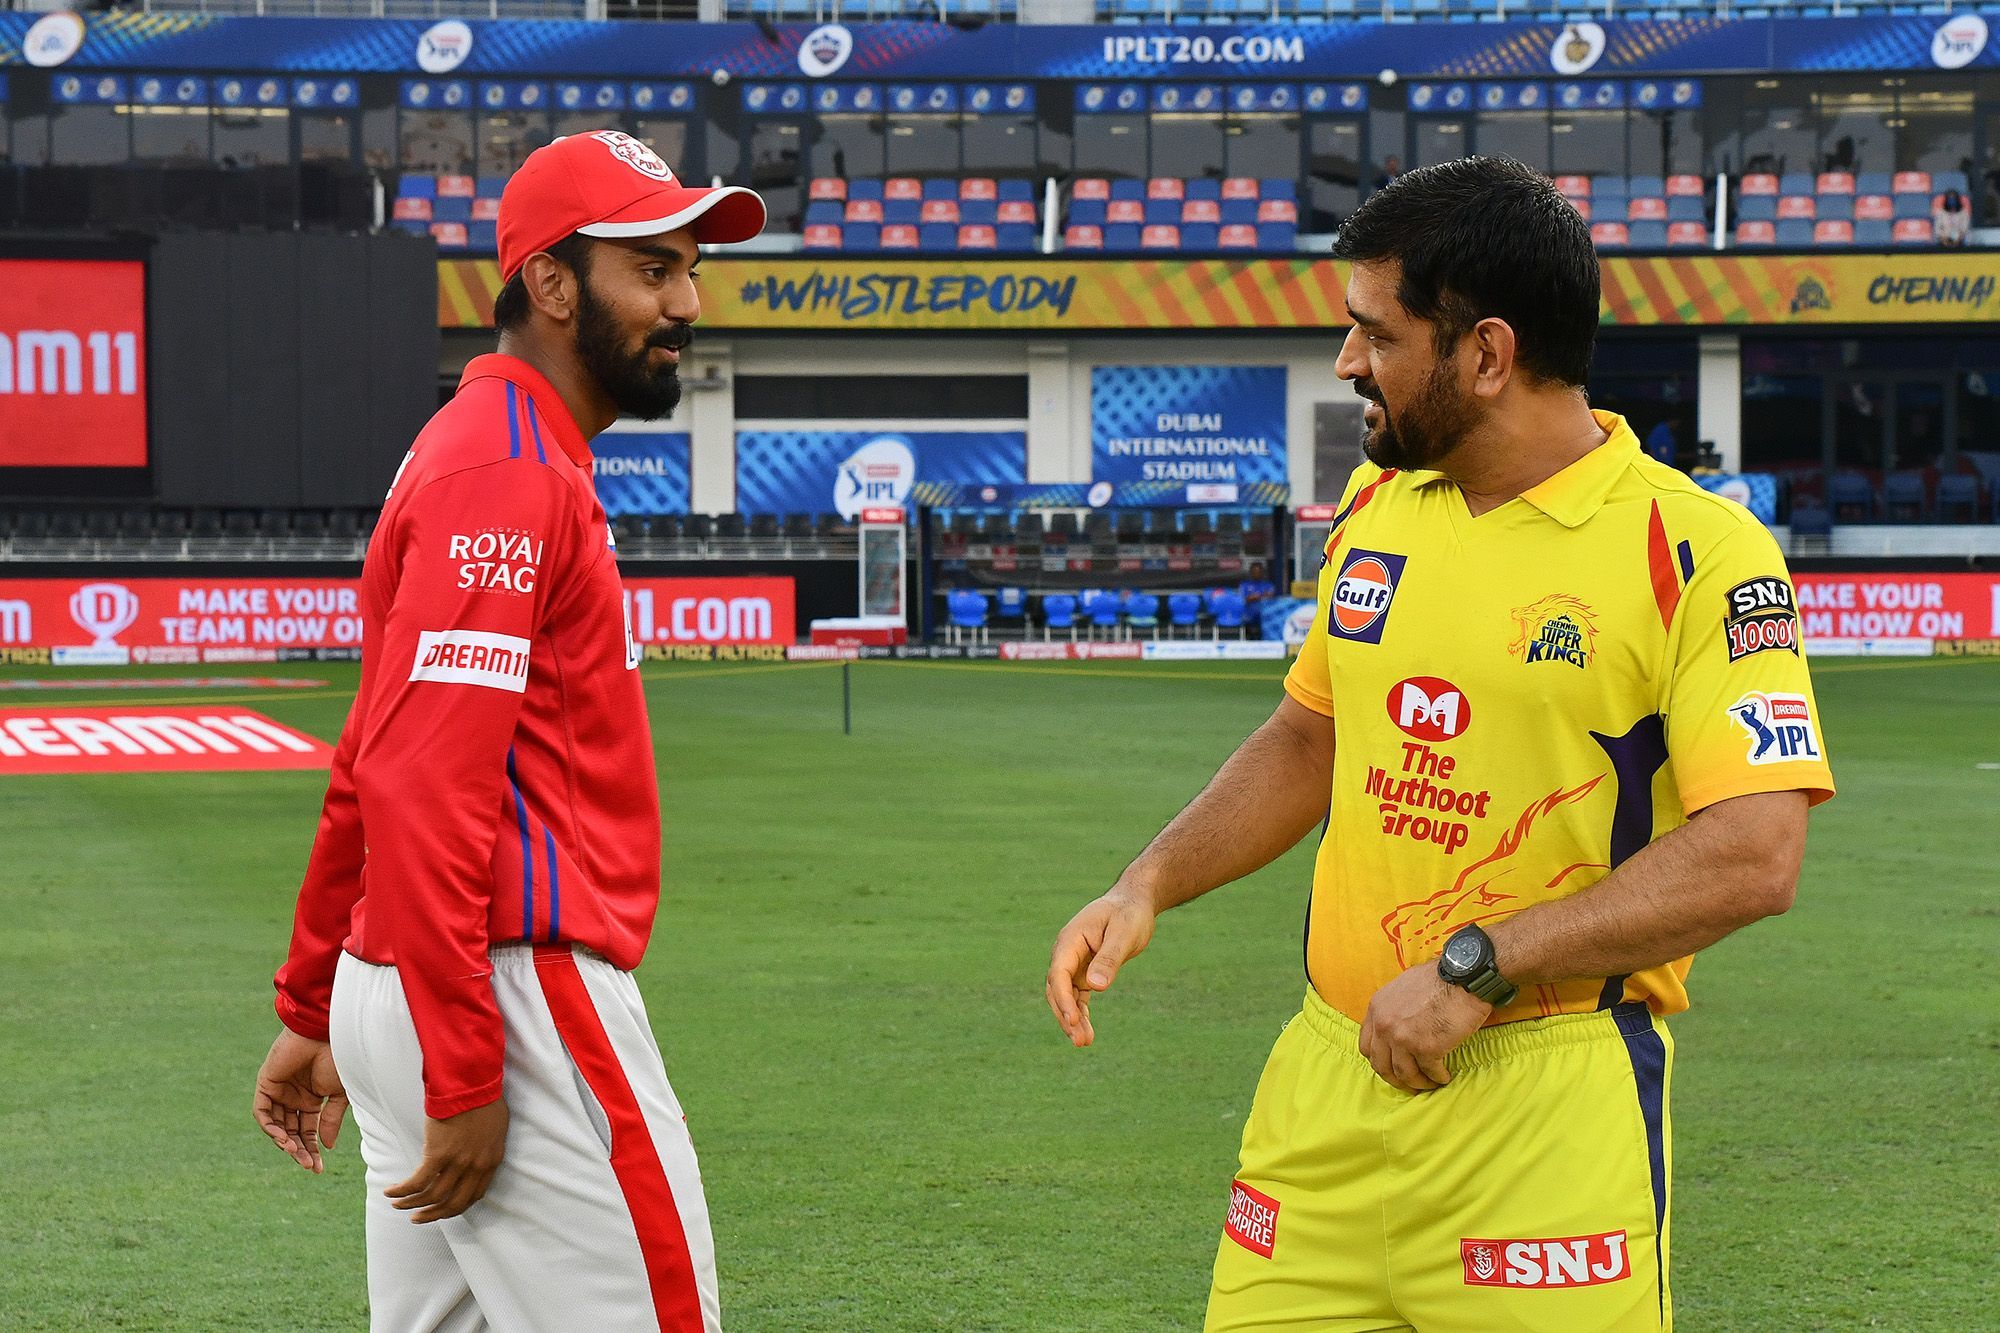 CSK has defeated KXIP by 10 wickets the last time these two teams met in IPL 13 | BCCI/IPL